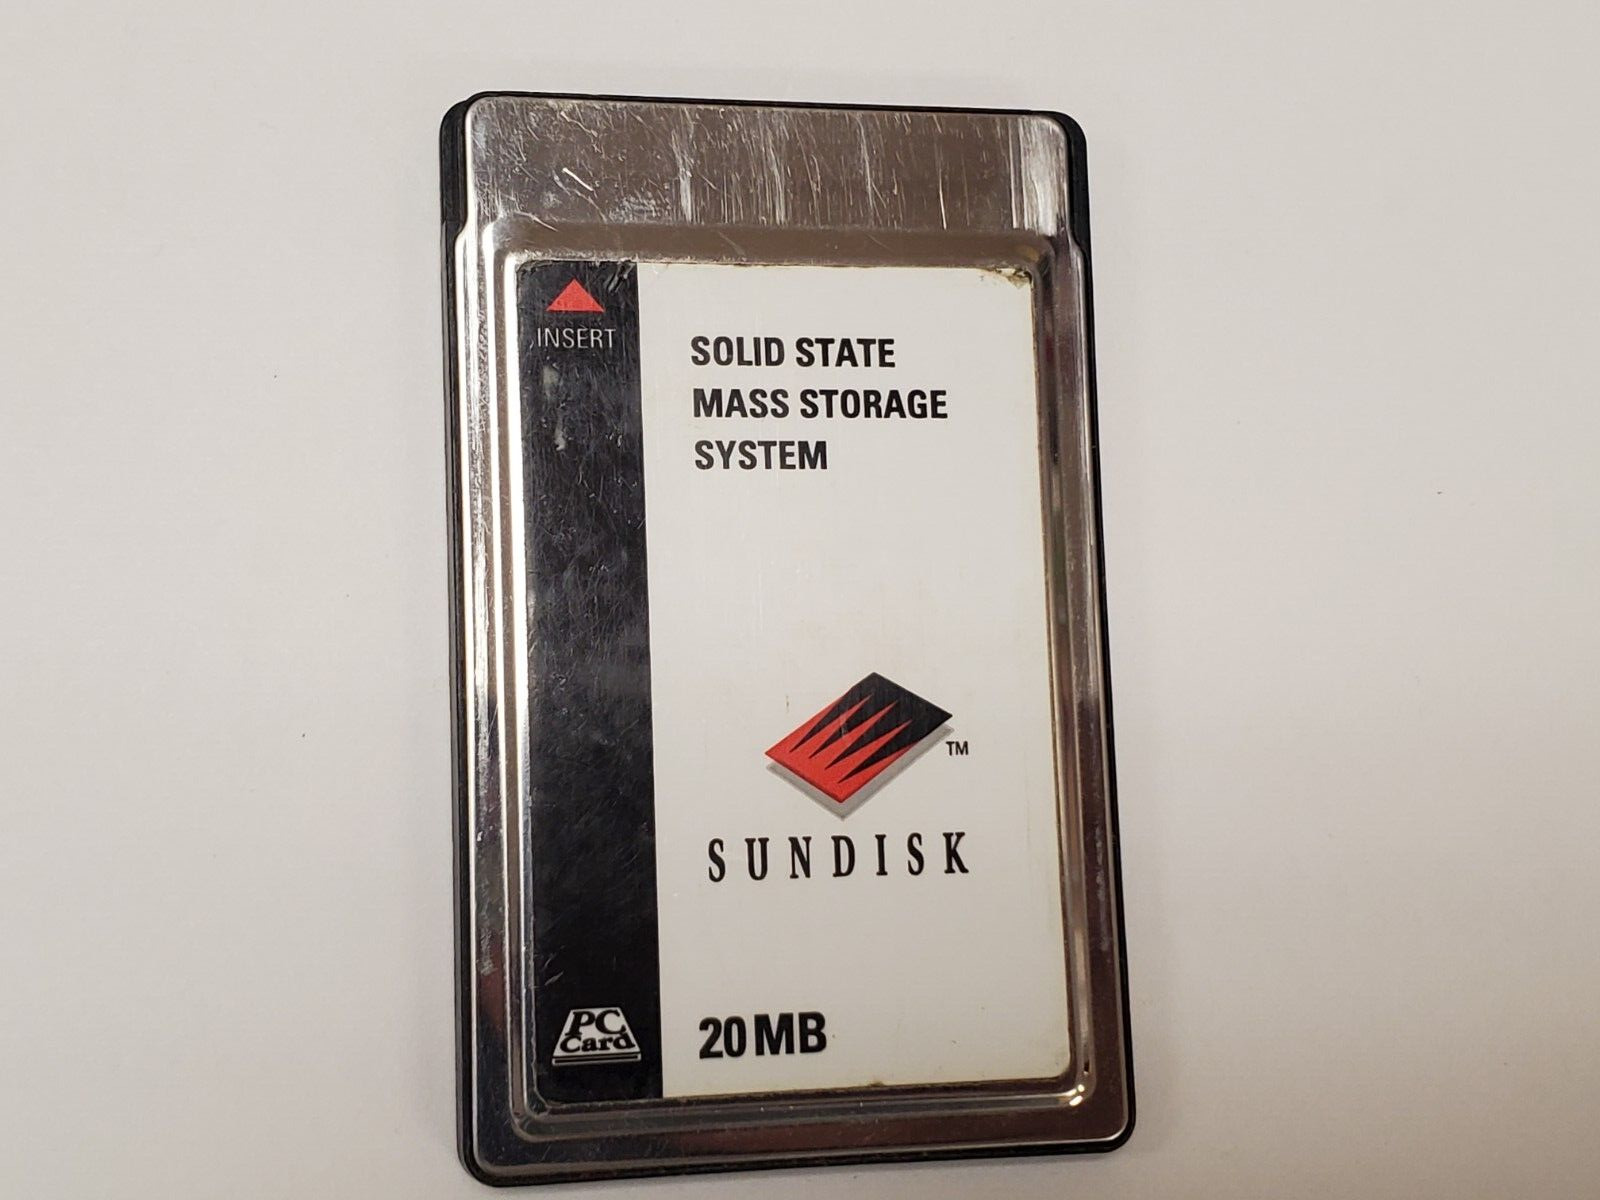 SUNDISK 20MB PCMCIA SOLID STATE MASS STORAGE for HP Palmtop 200LX 100LX 1000CX